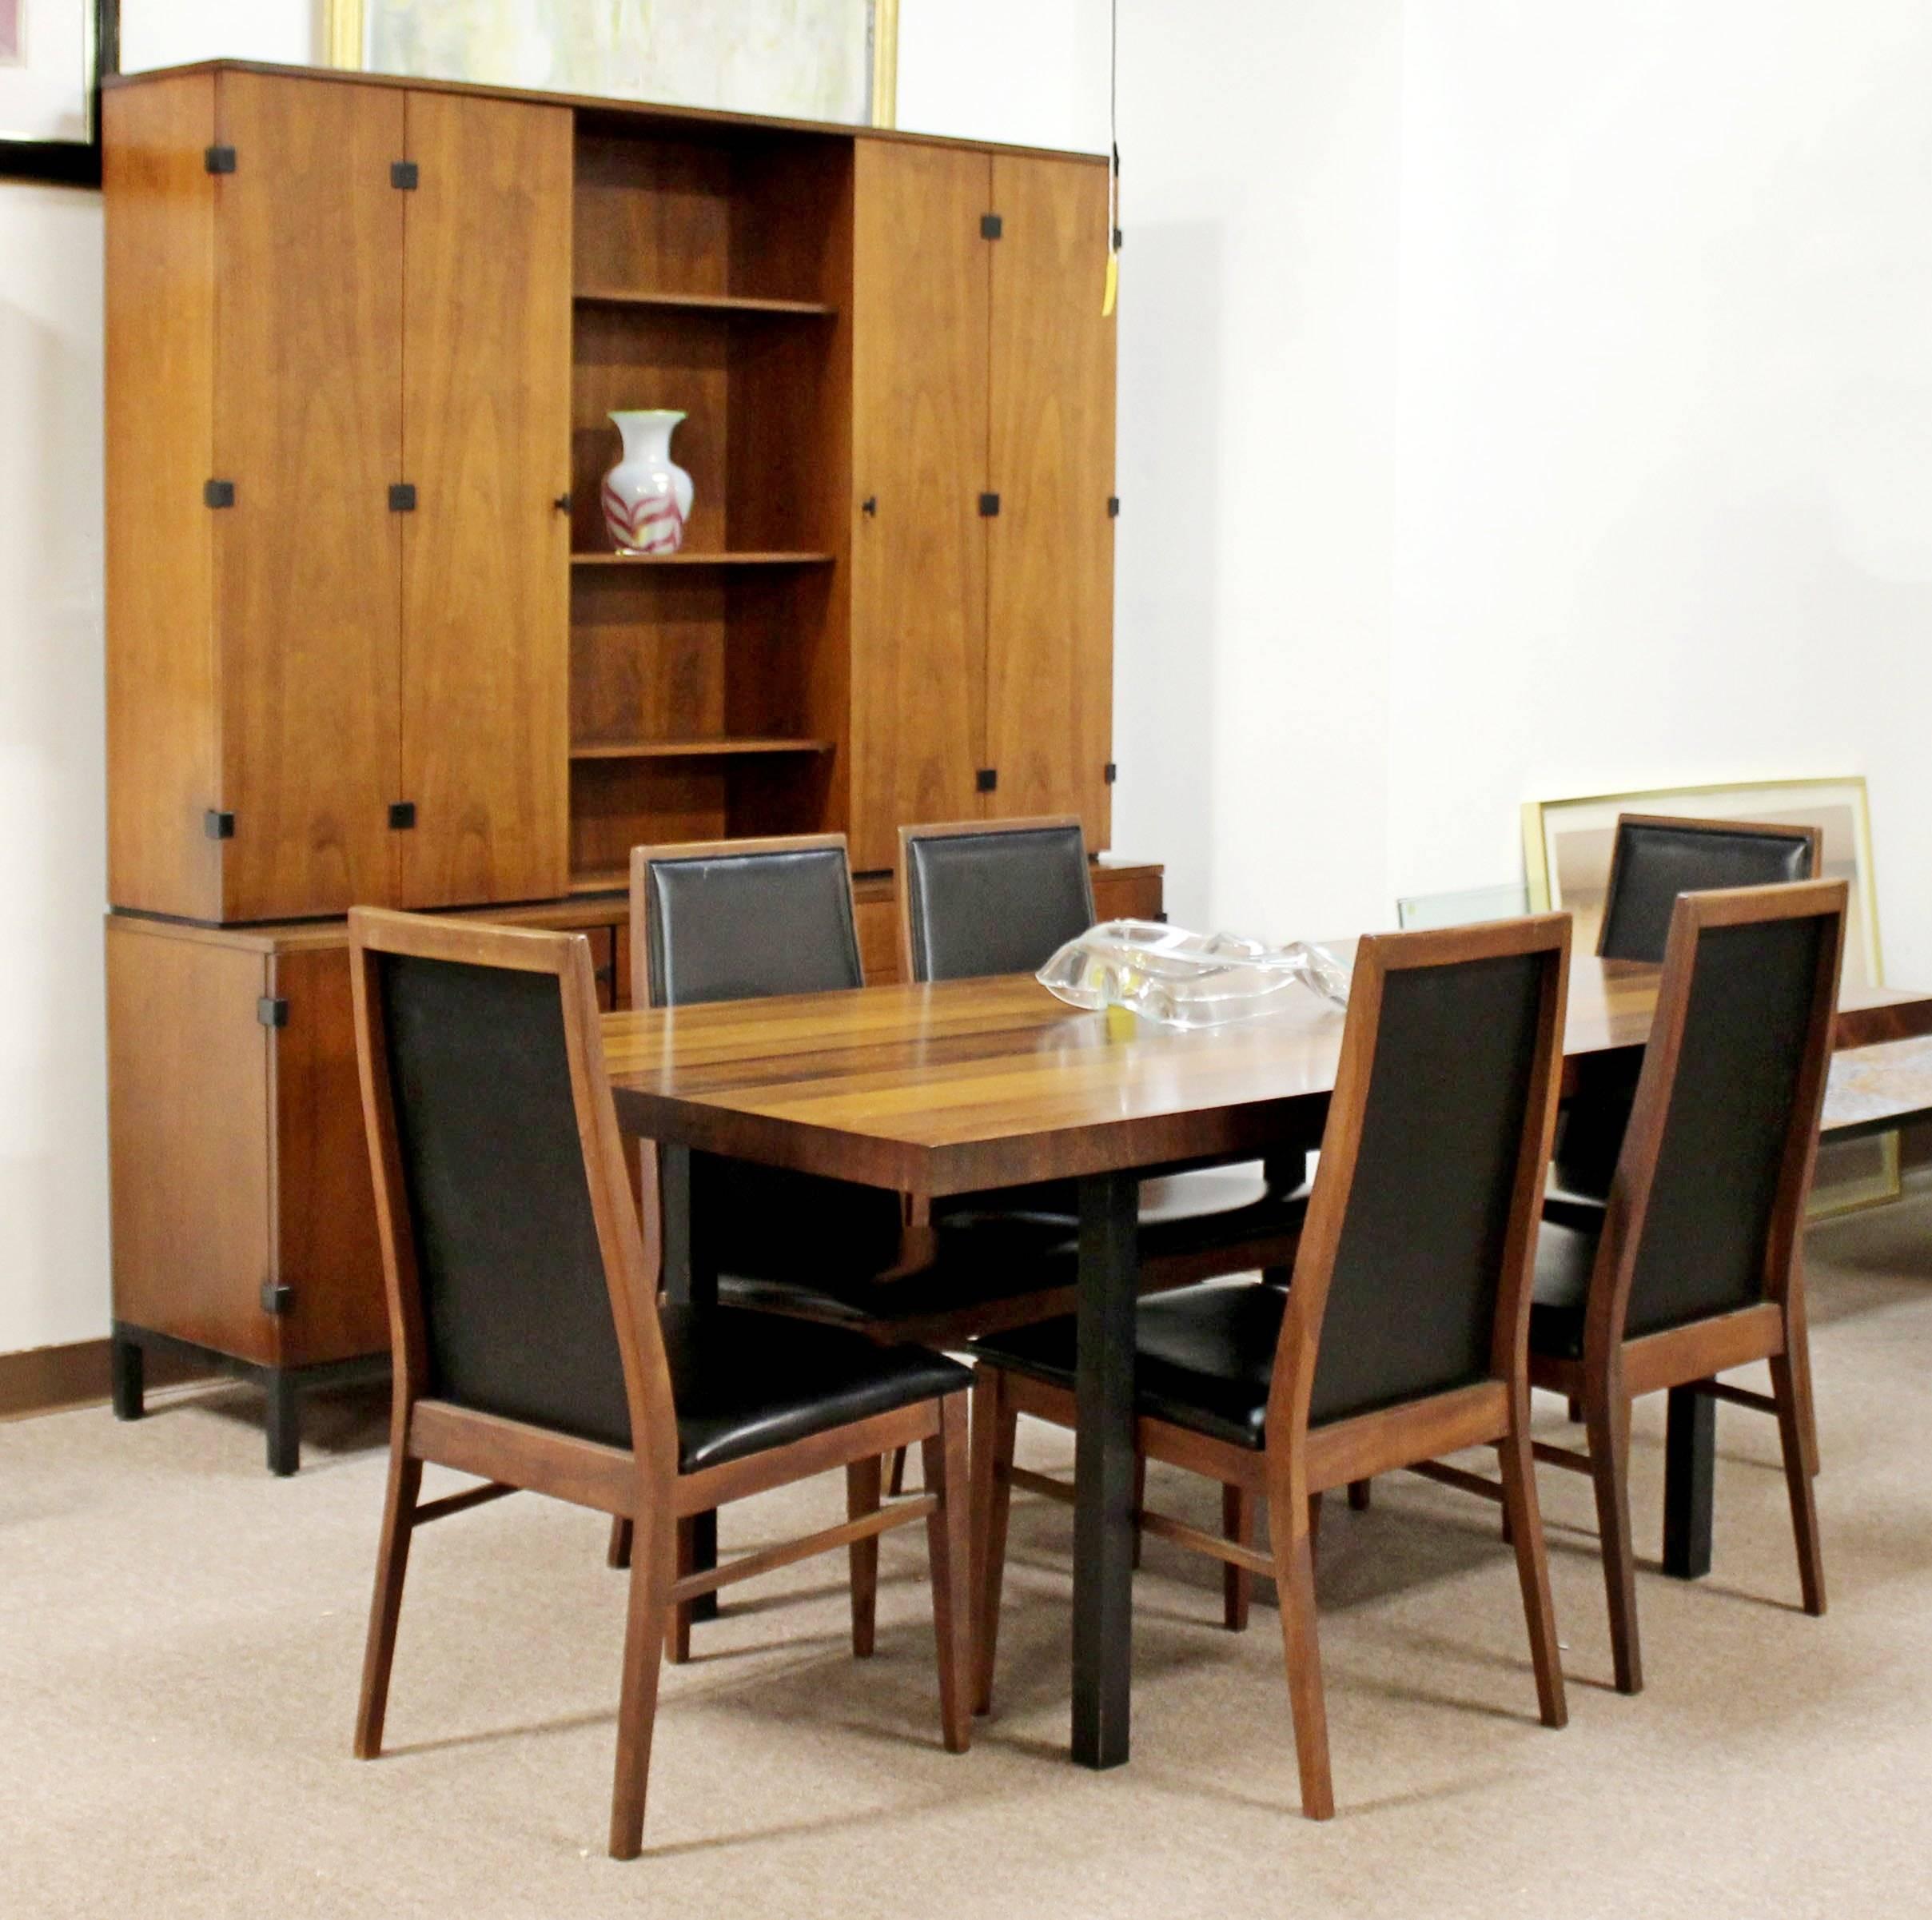 For your consideration is a magnificent dining set, including table by Milo Baughman for Directional with rosewood, walnut and ash, and six side chairs, by Milo Baughman for Dillingham, circa 1960s. In great vintage condition. The dimensions of the